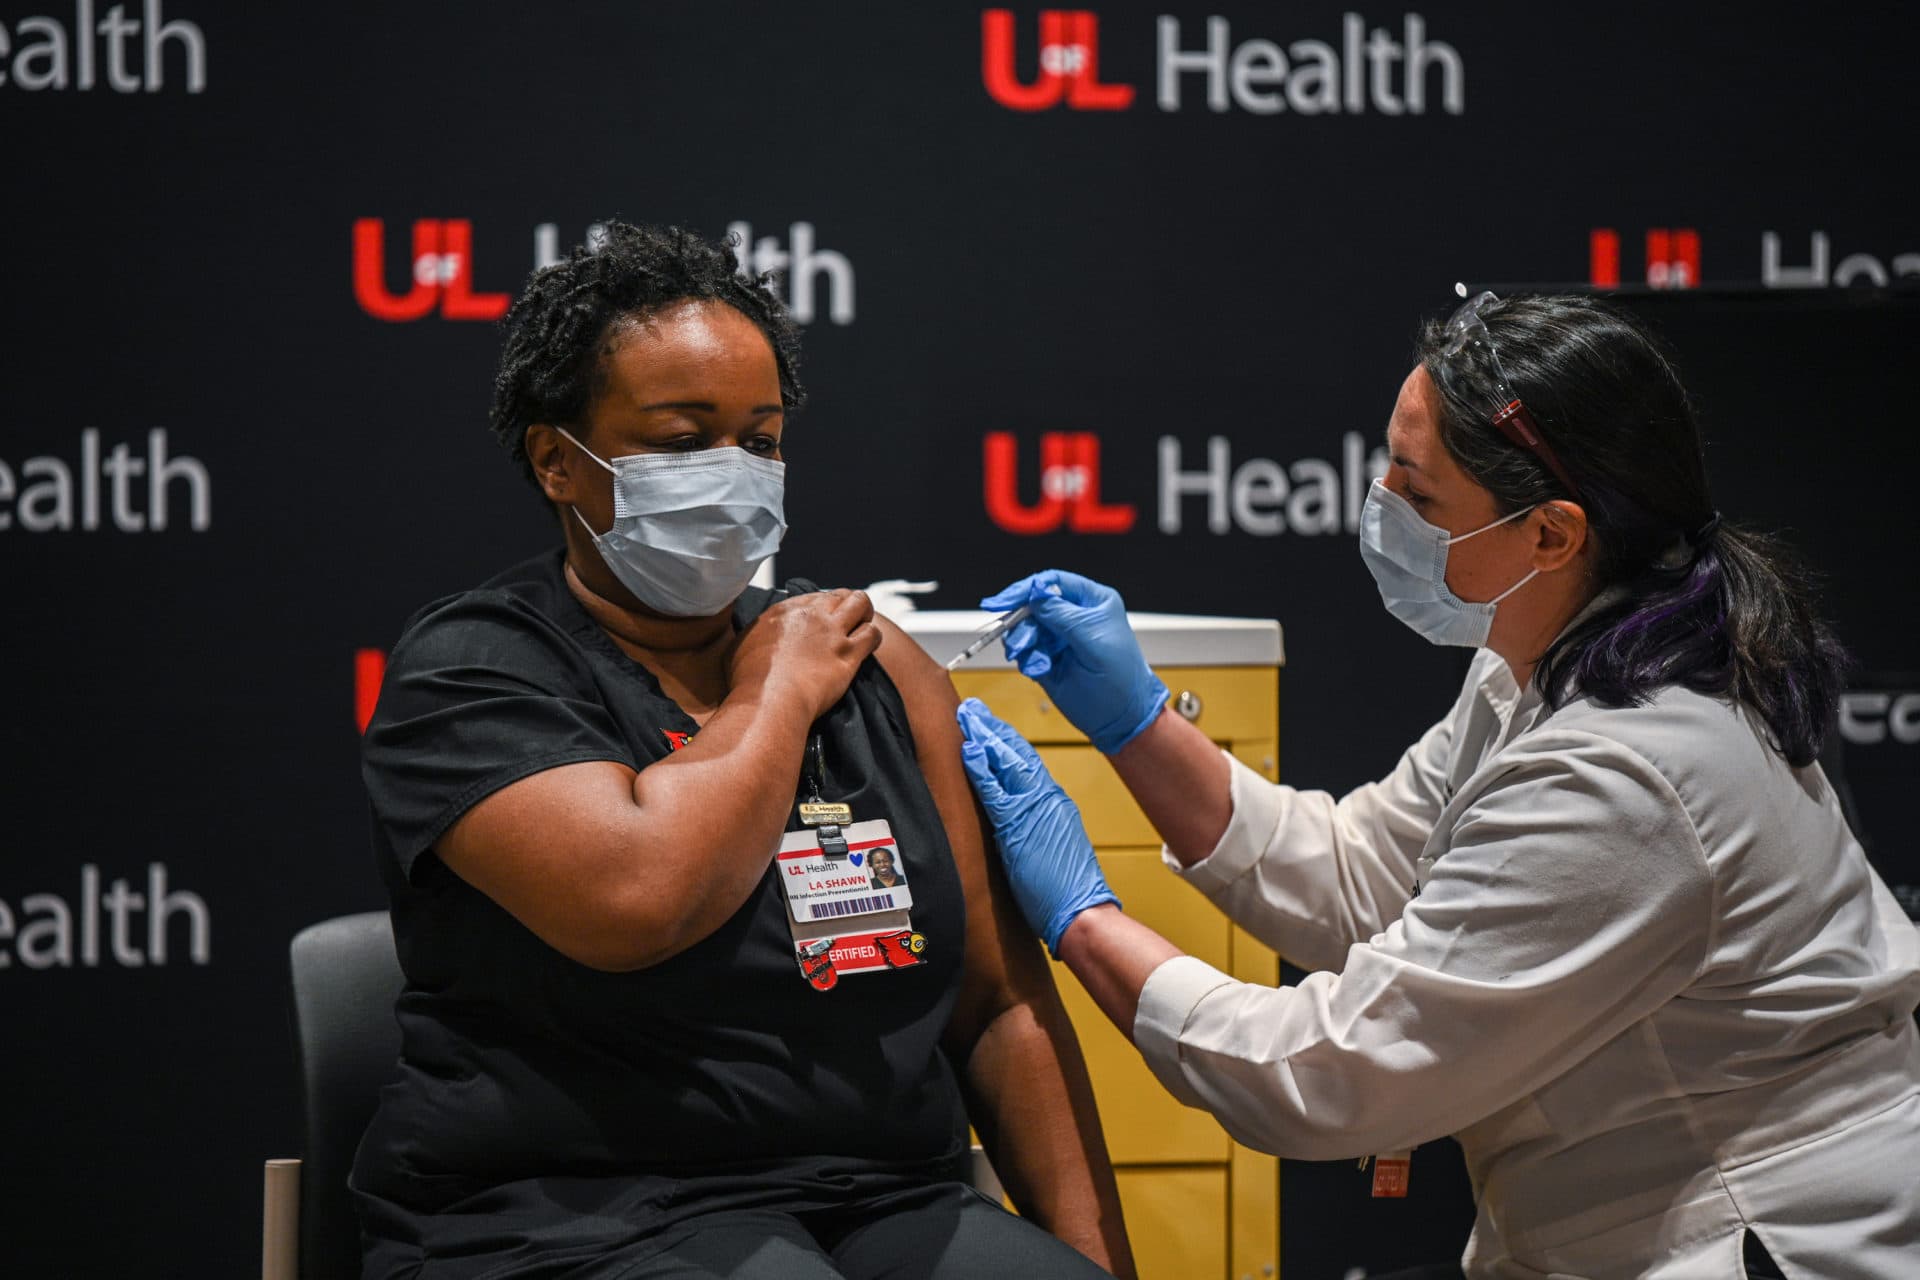 LaShawn Scott, RN receives a COVID-19 vaccination at University of Louisville Hospital on December 14, 2020 in Louisville, Kentucky. The Pfizer-BioNTech vaccine became available for specified use on Monday morning to five members of hospital staff. (Jon Cherry/Getty Images)